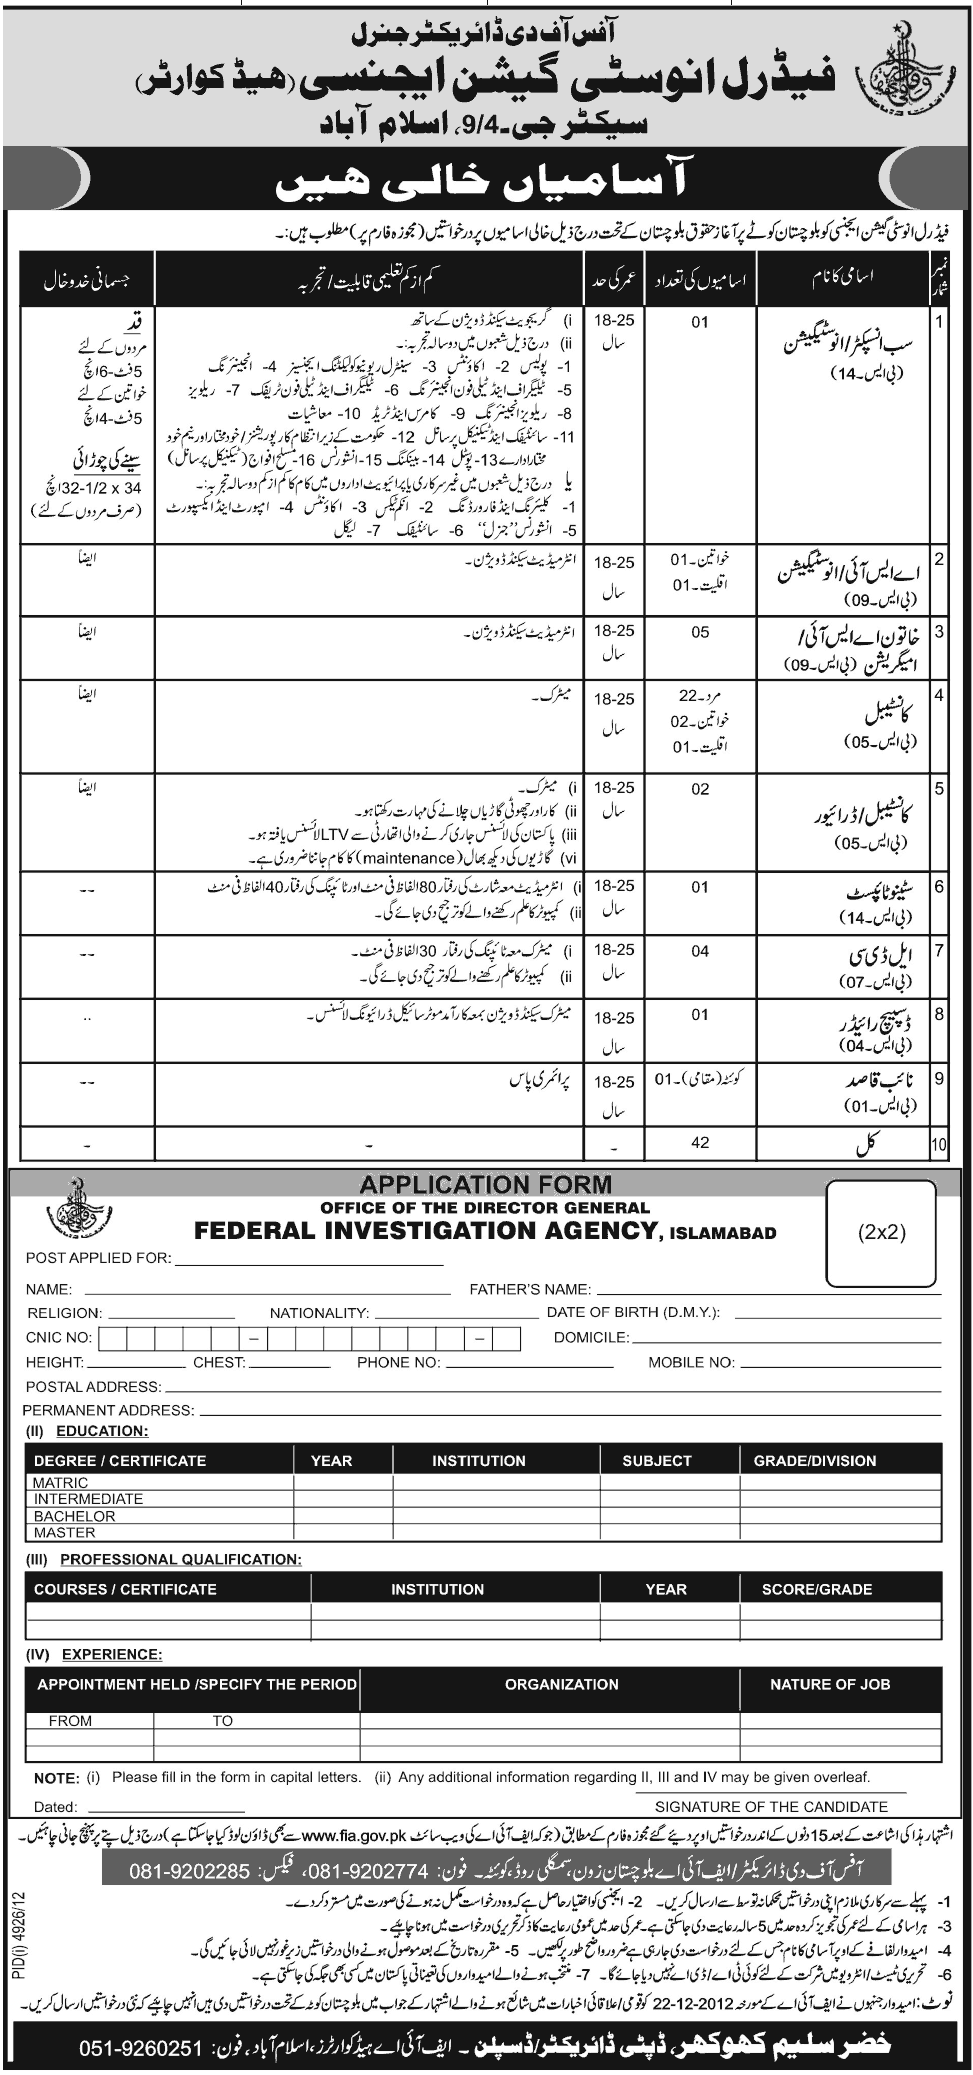 Jobs for Sub Inspector, ASI, Constable & Stenotypist in FIA Islamabad